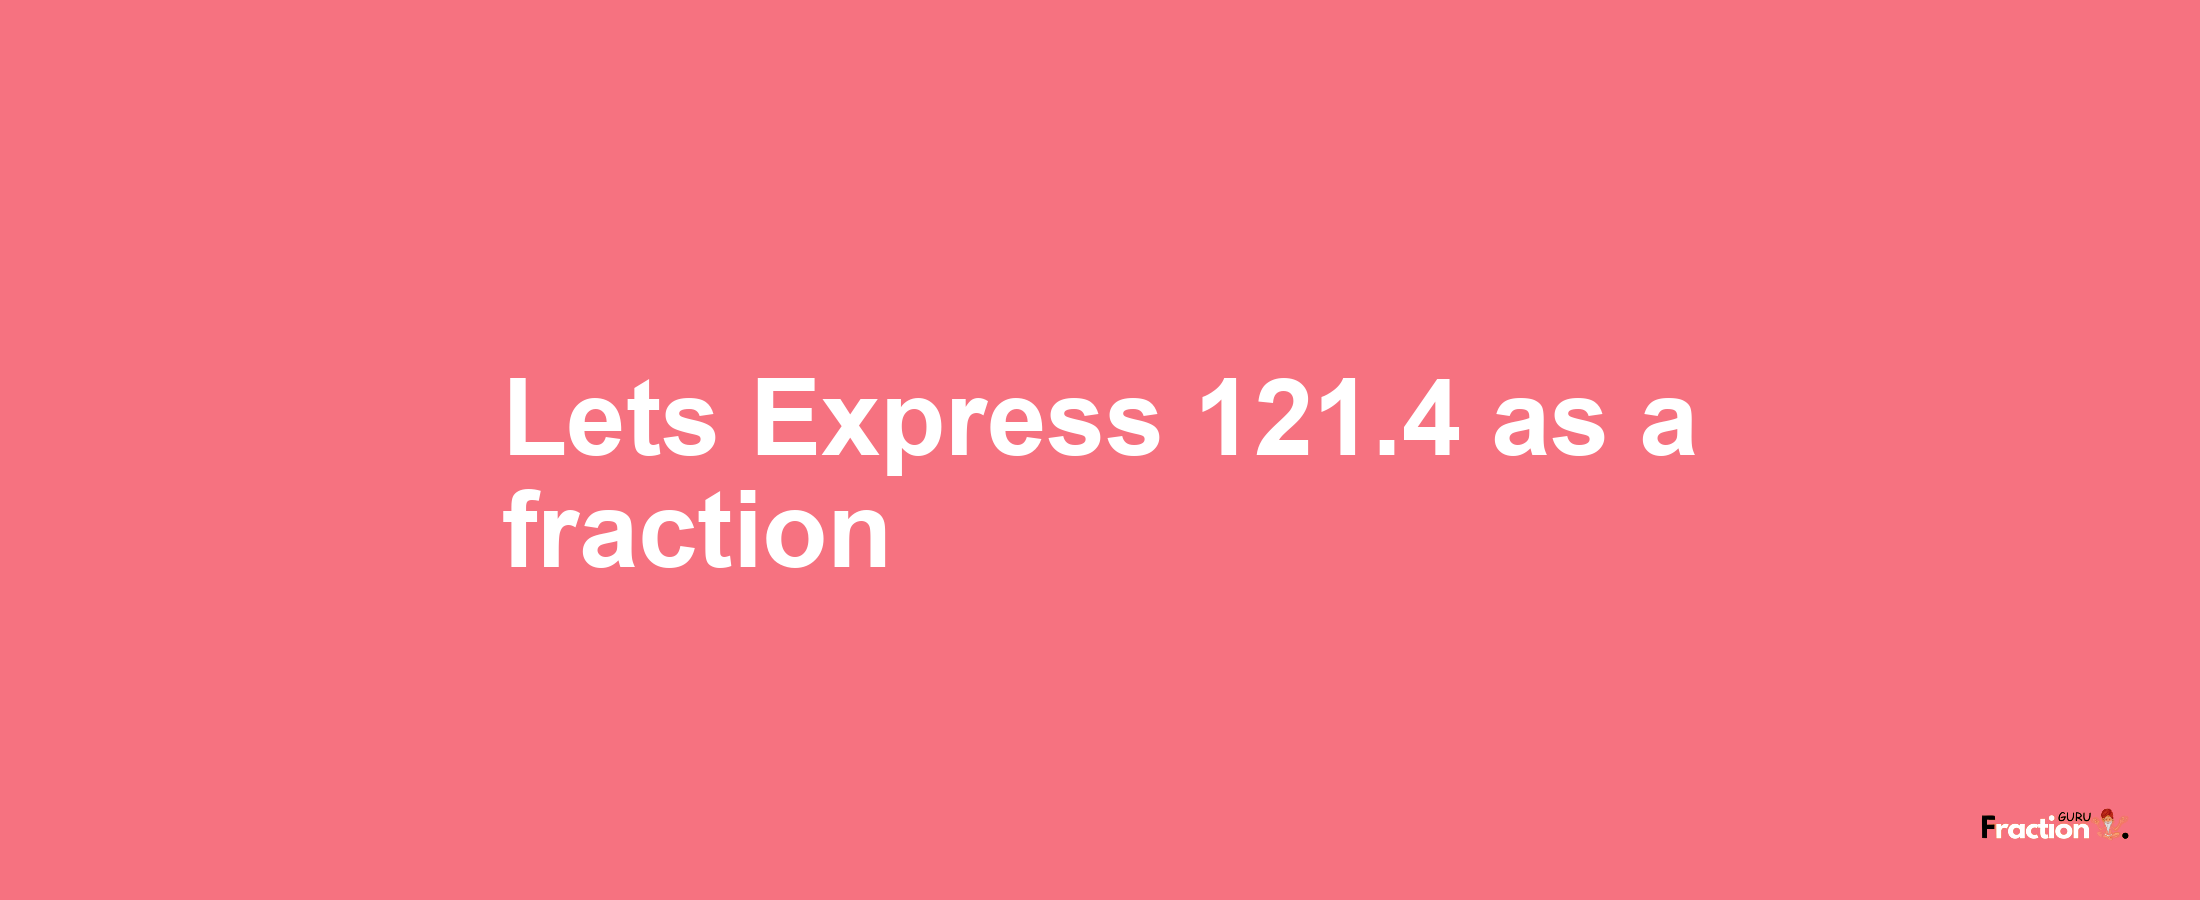 Lets Express 121.4 as afraction